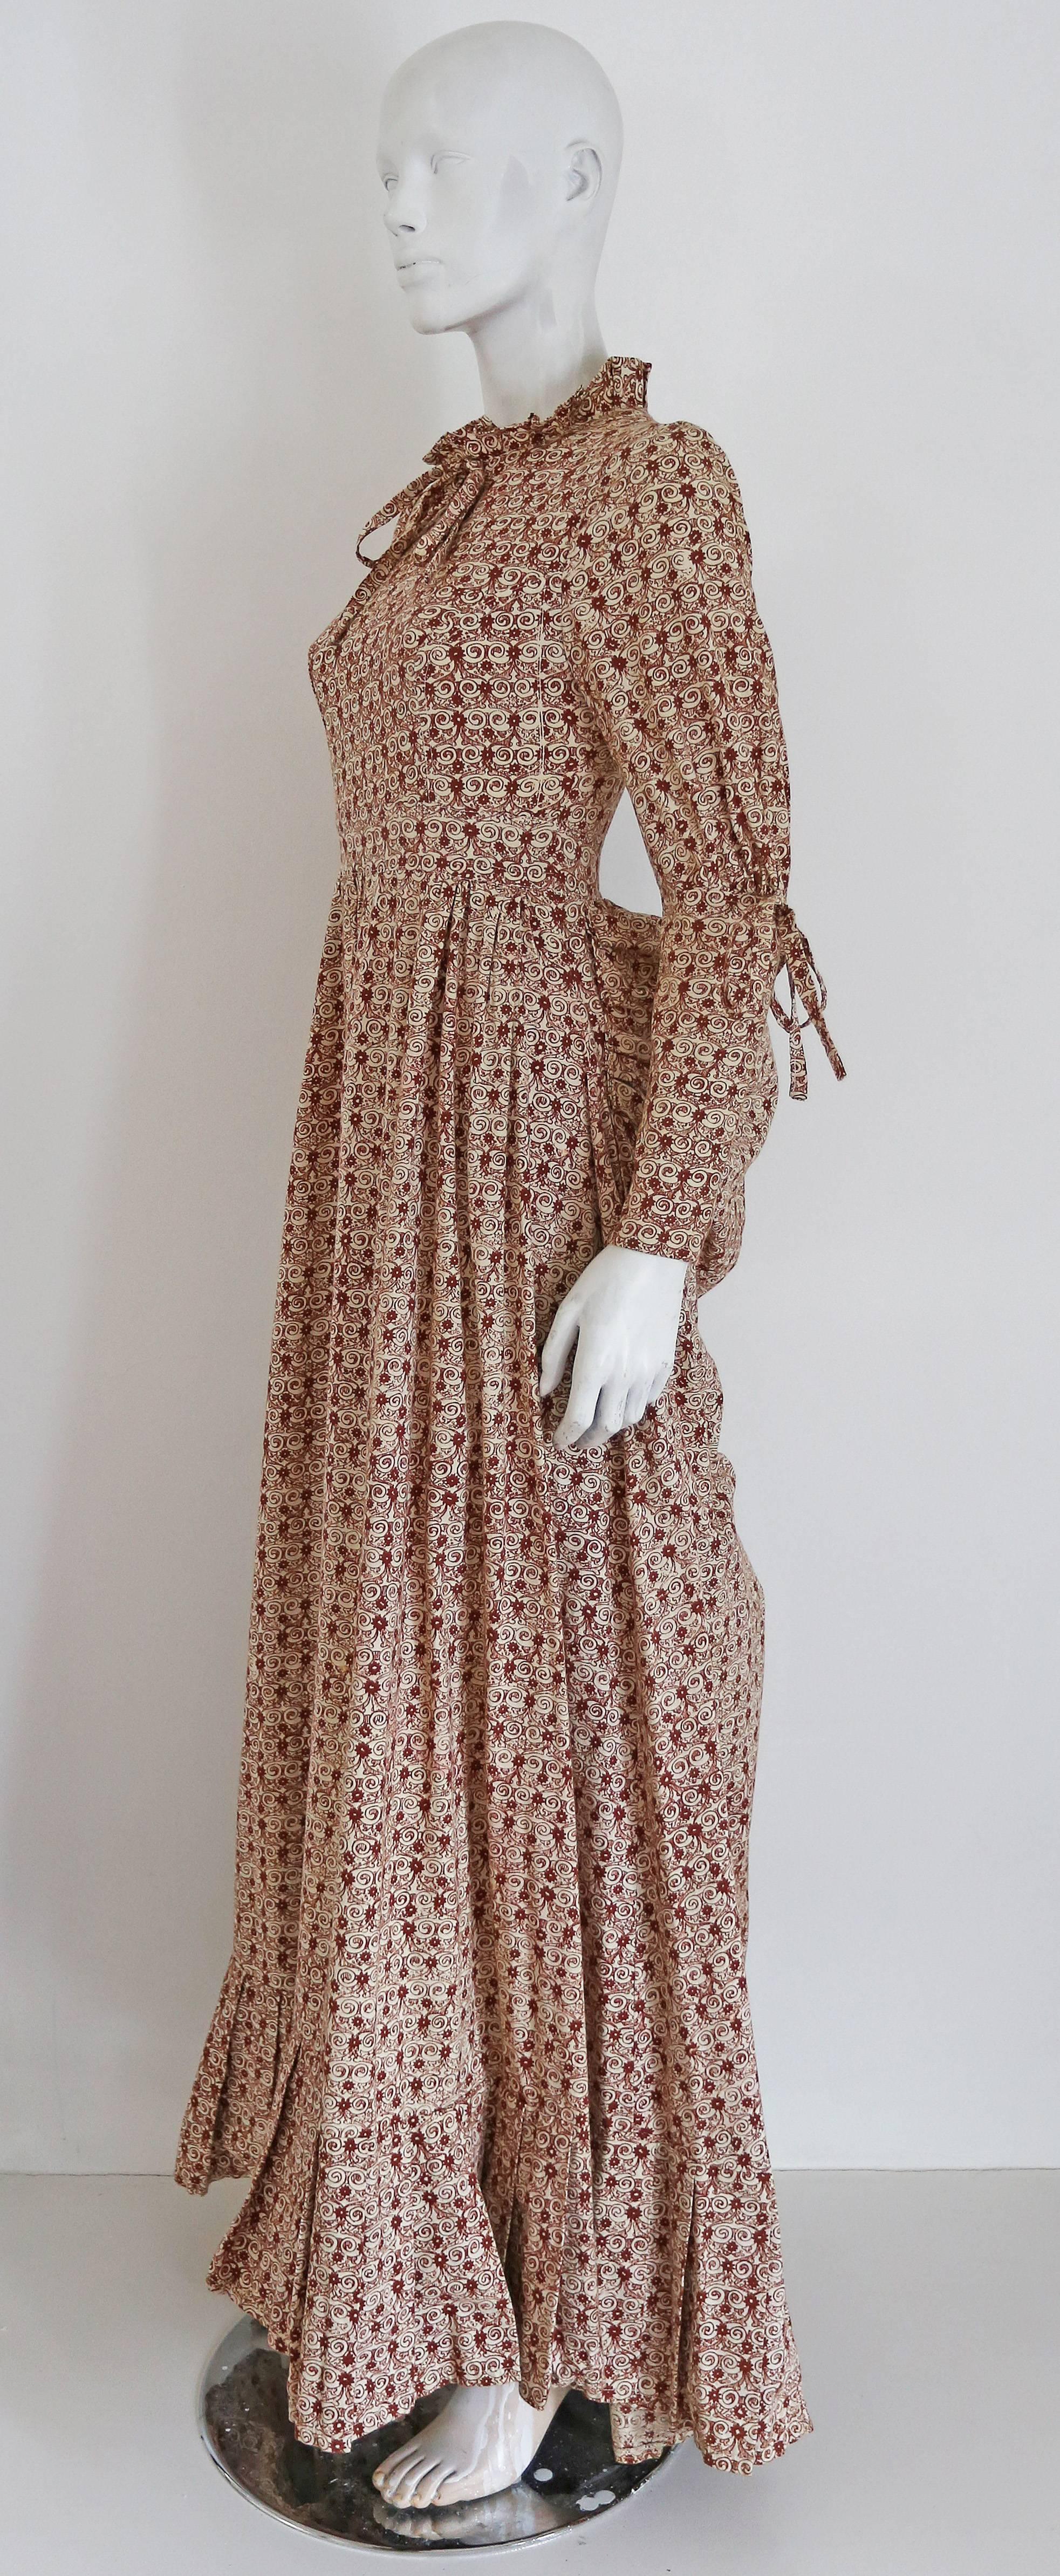 An extraordinary Laura Ashley evening dress with bustle, circa early 1970s. The dress is in a fine cotton with screen printed floral print. 

Size: Eu 38-40 10-12
Shoulder to shoulder - 18